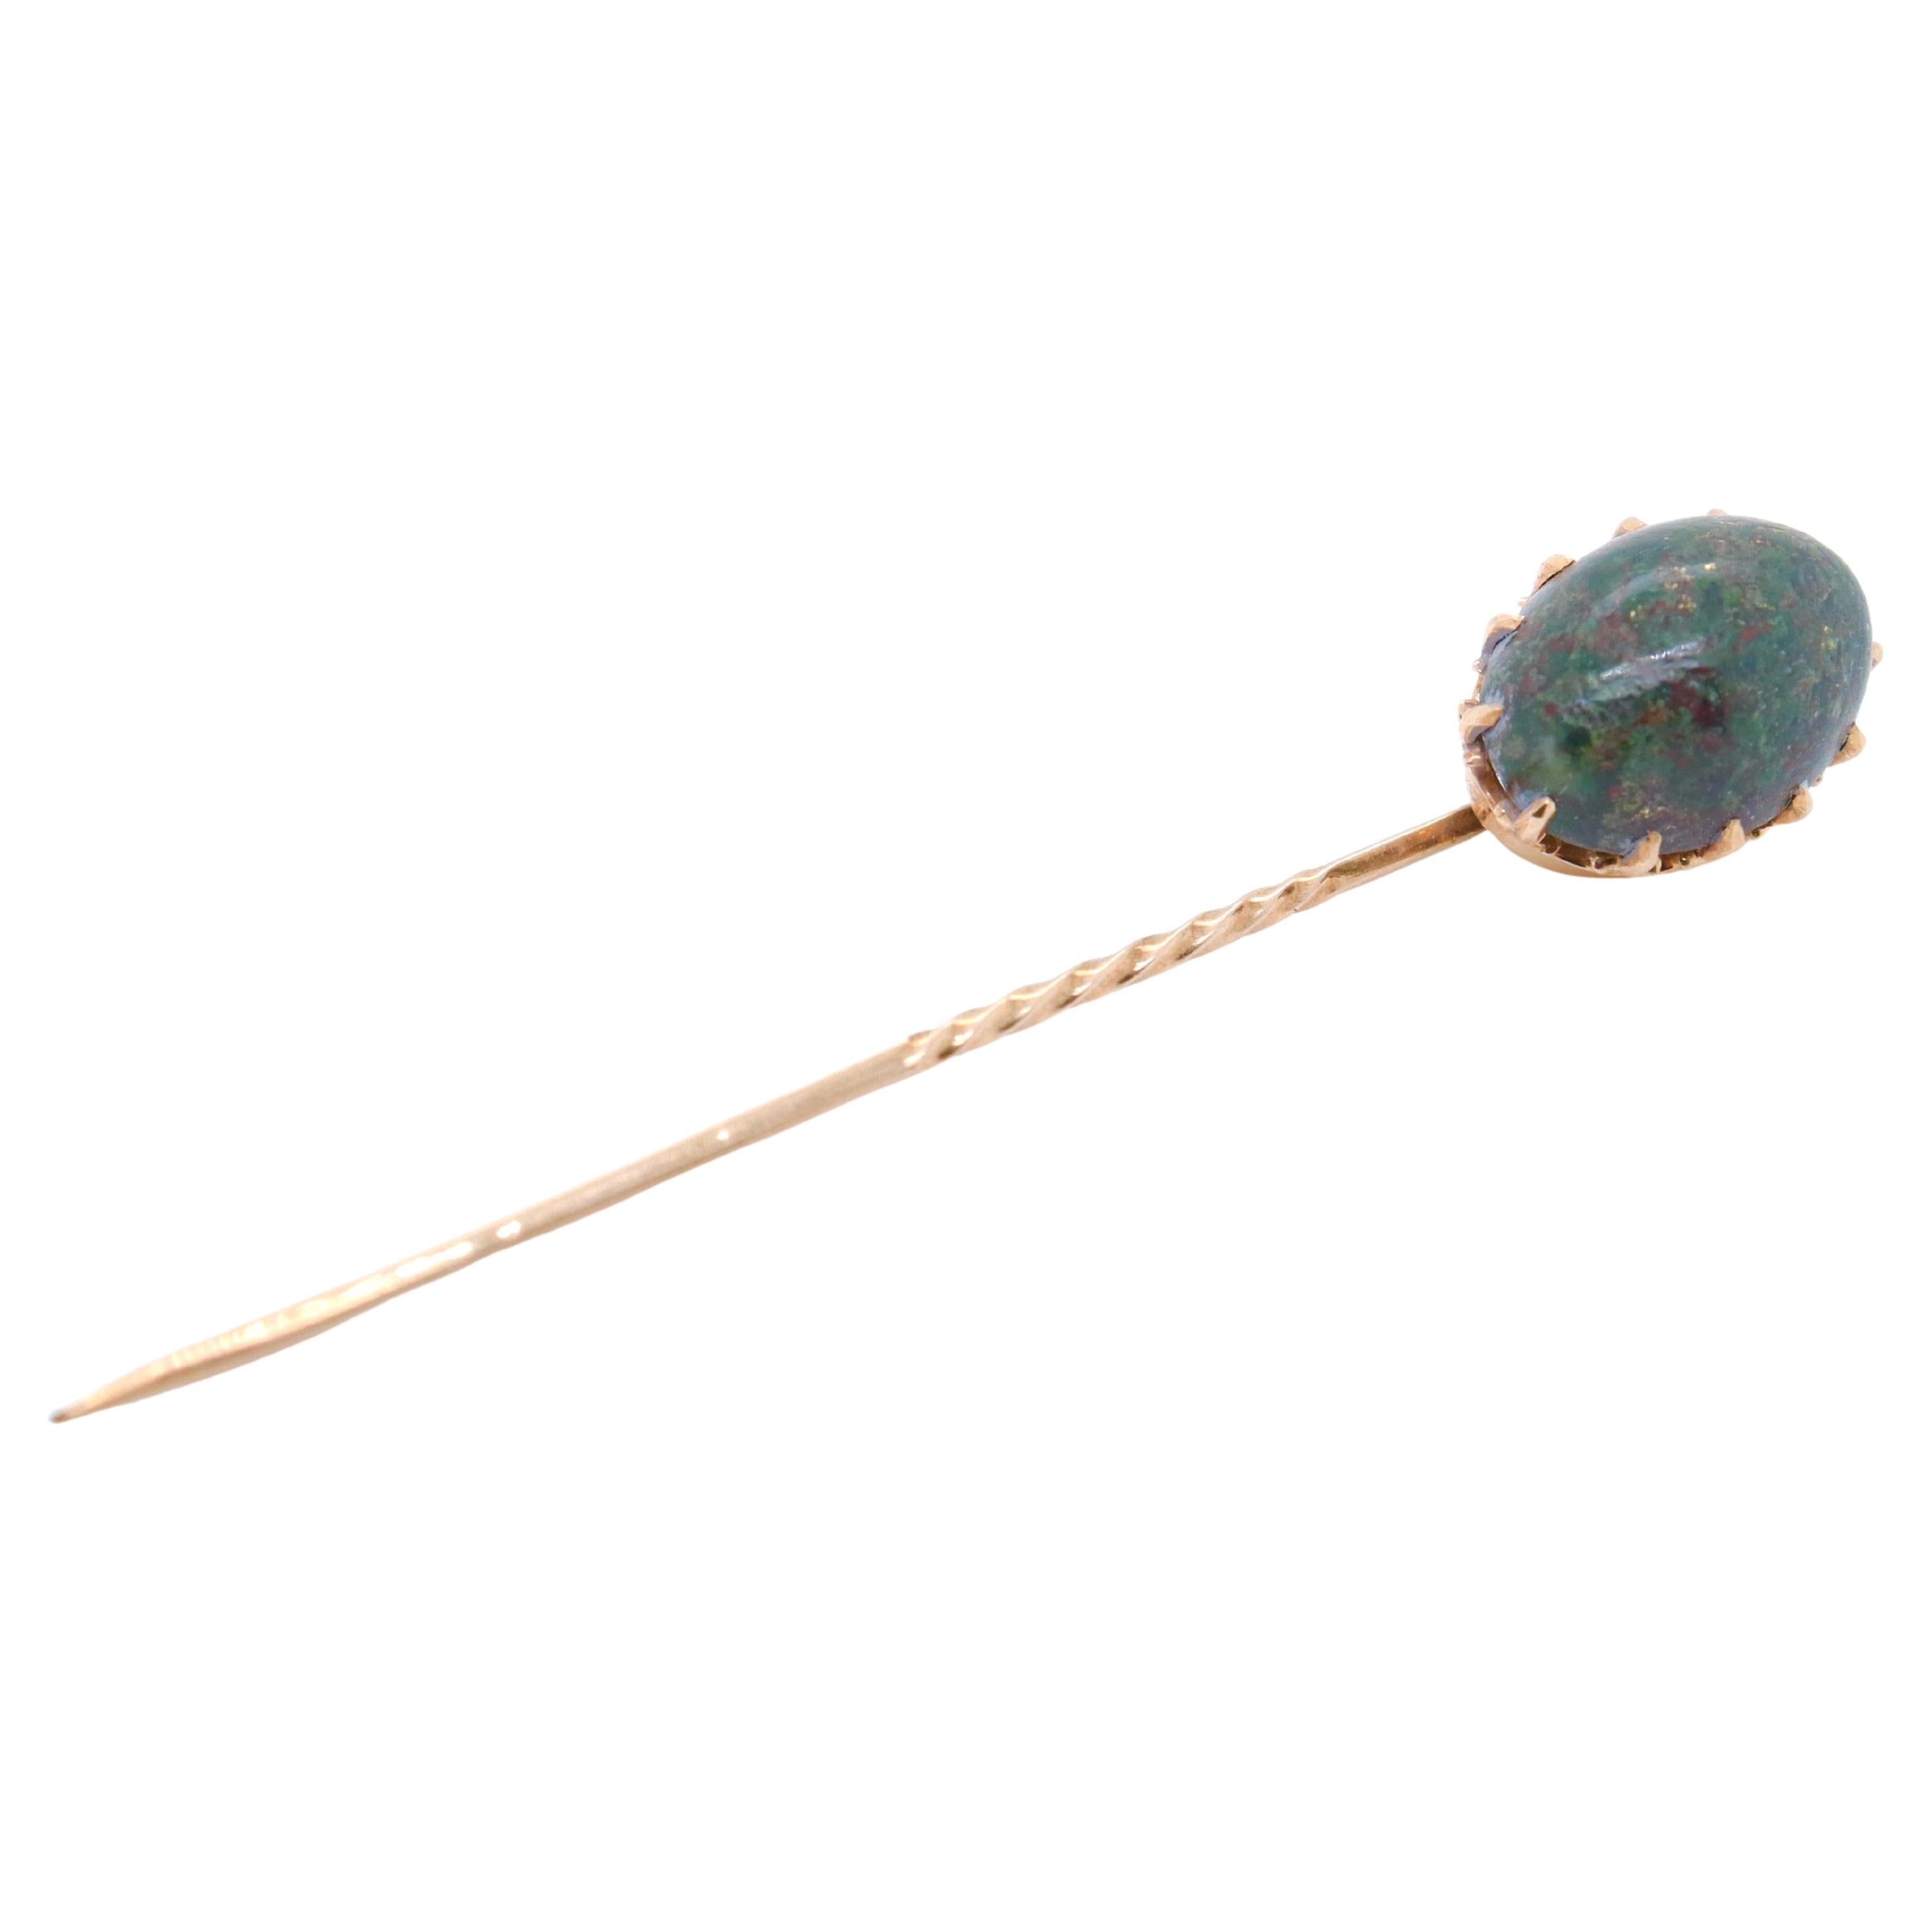 Antique Edwardian 14k Gold and Bloodstone Cabochon Stick Pin For Sale